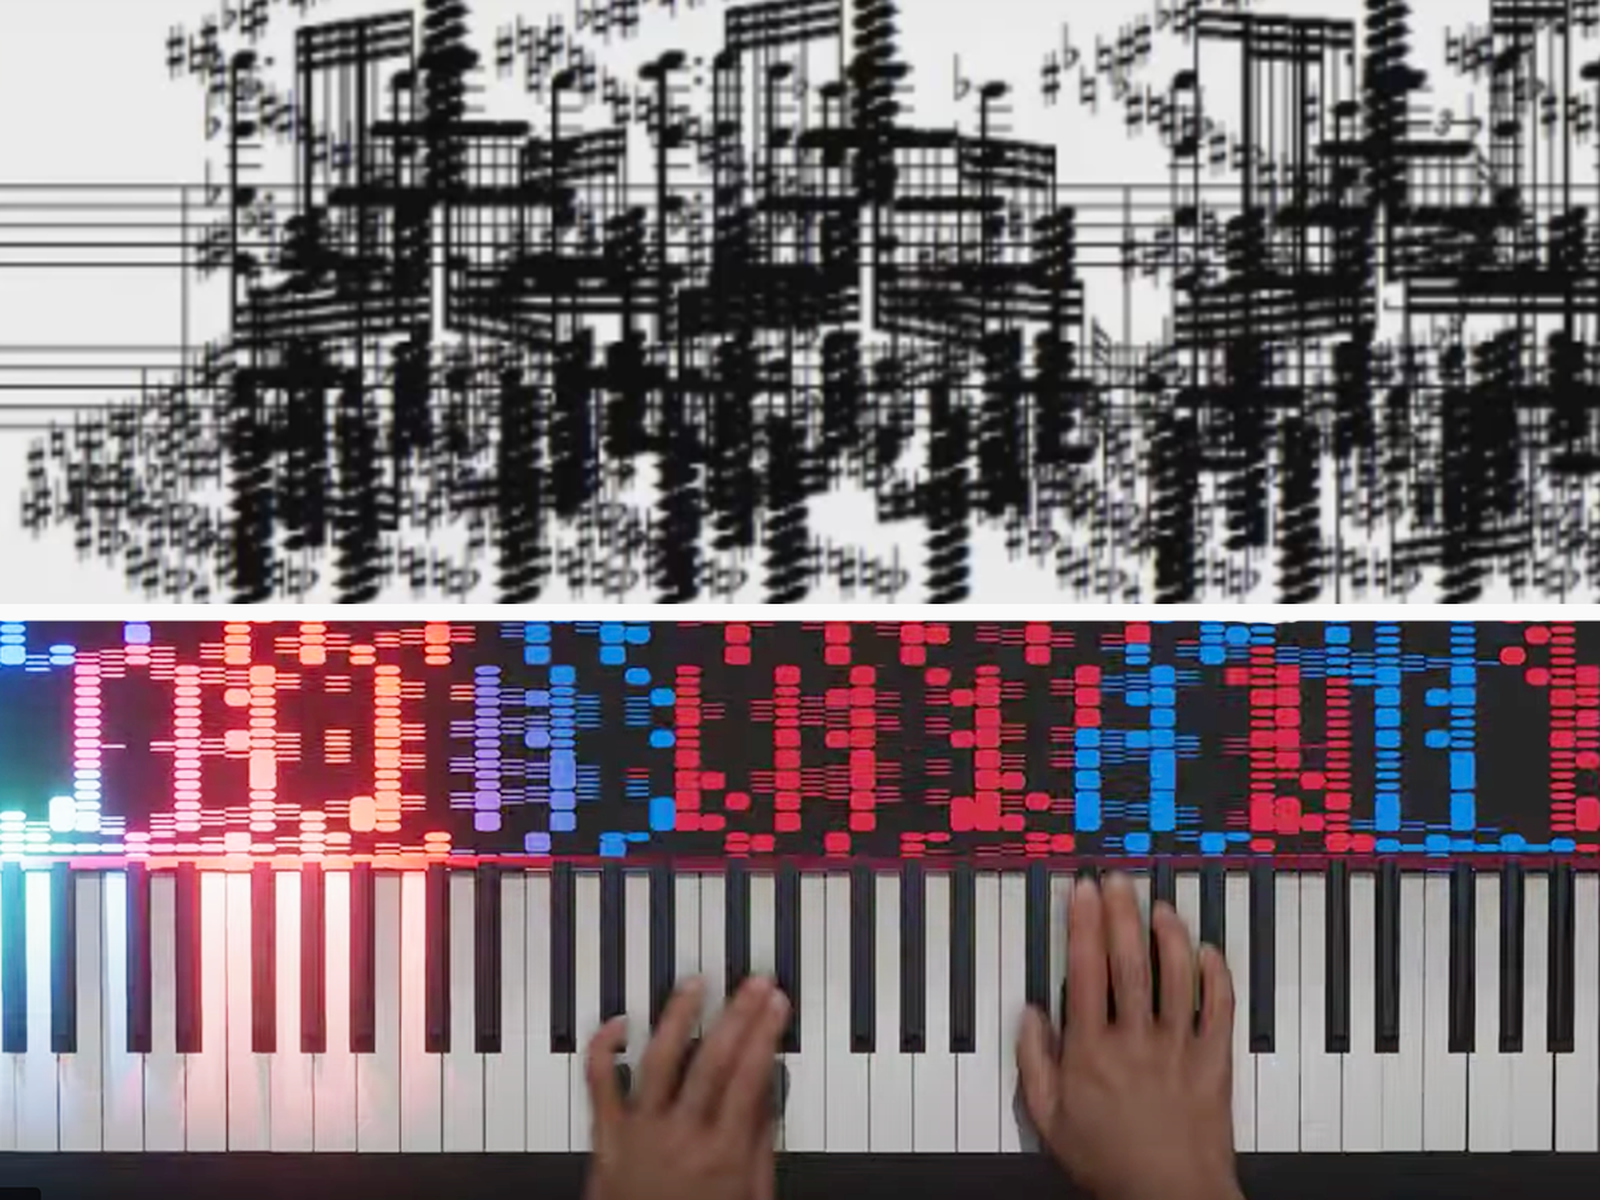 This AI pianist performed an 'unplayable' piece and it's terrifying - Classic FM